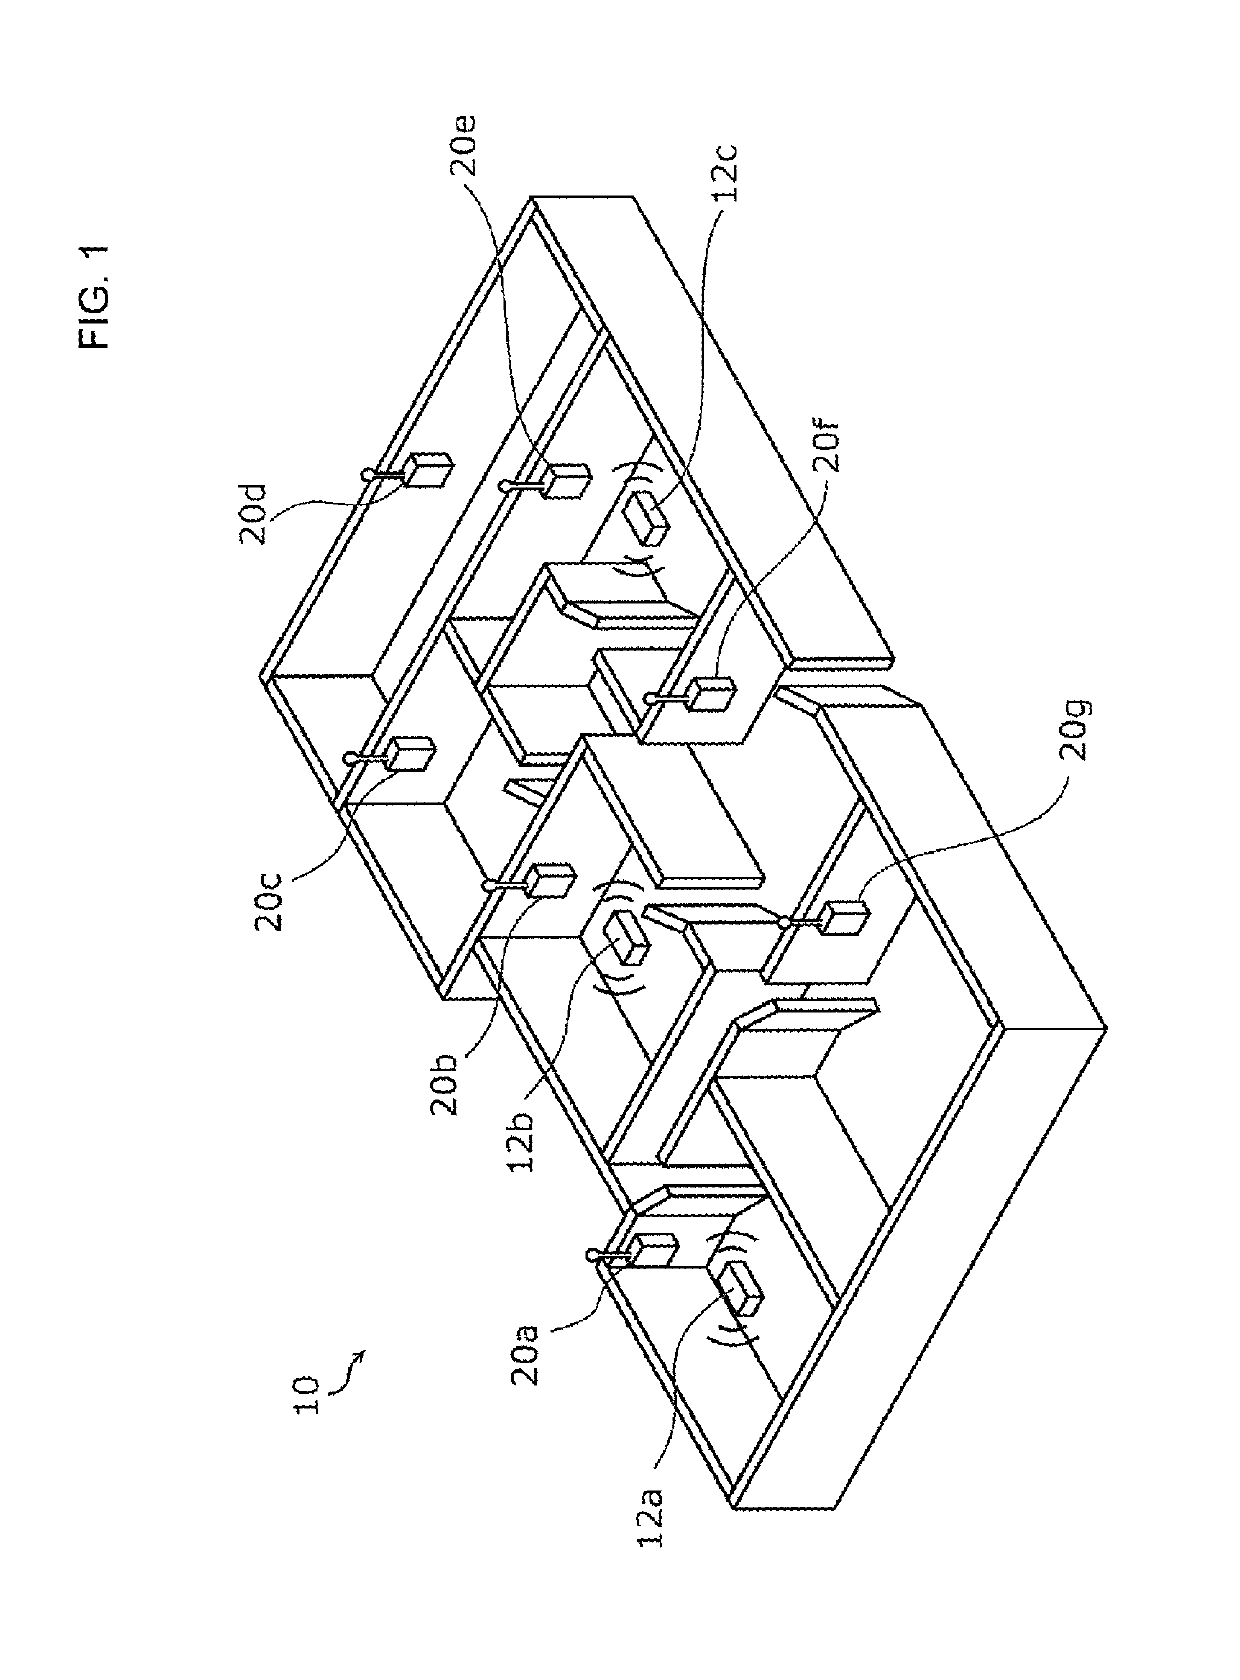 Position detection system and receiver